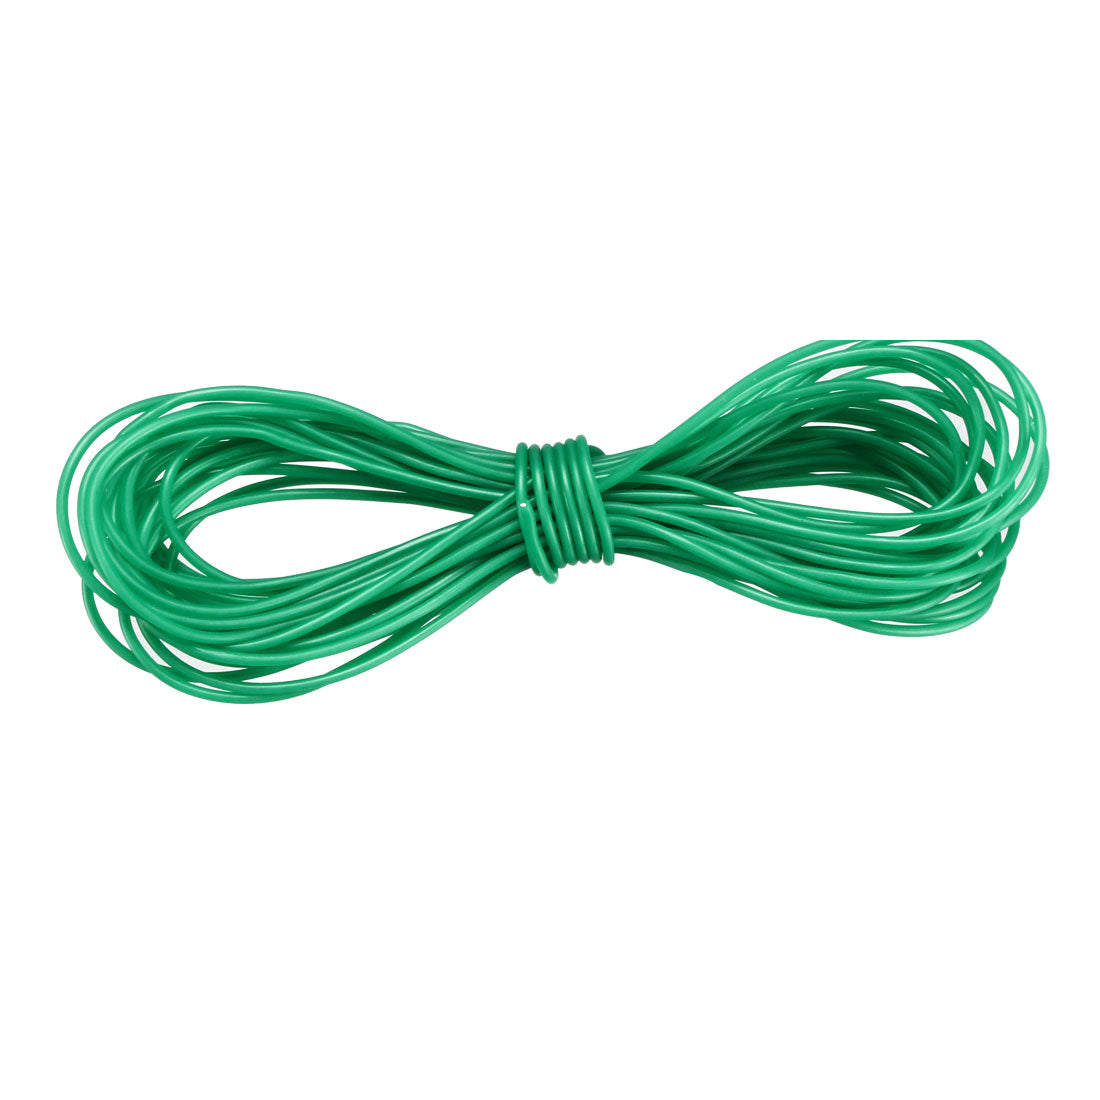 uxcell Uxcell Extension Cable Wire Cord 28 AWG Gauge Flexible Stranded Copper Cable Silicone Wire 5M Length Green for RC